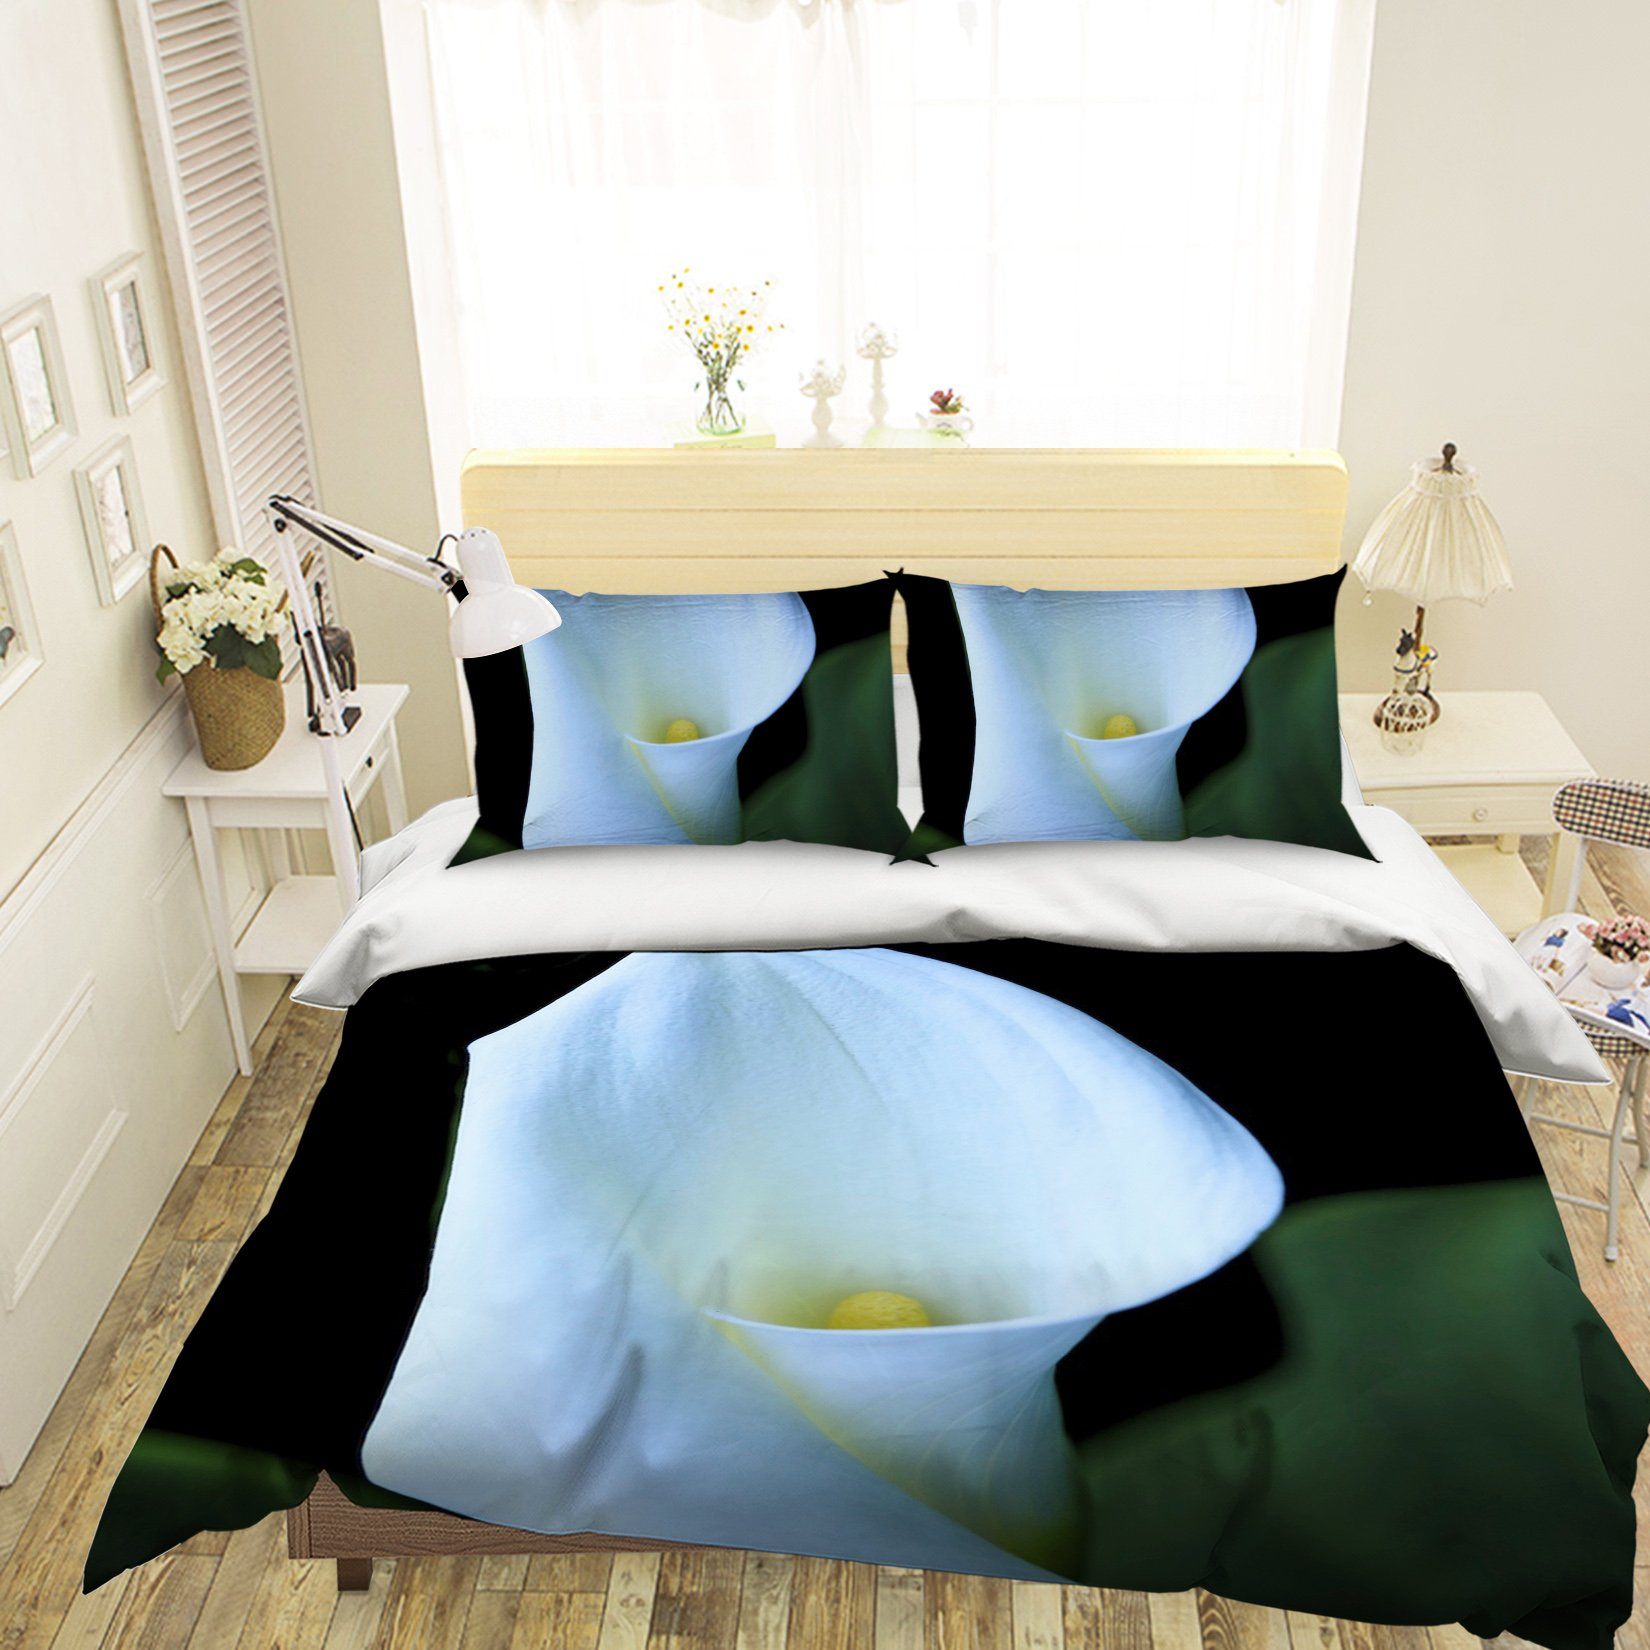 3D Calla Flower 2129 Kathy Barefield Bedding Bed Pillowcases Quilt Quiet Covers AJ Creativity Home 